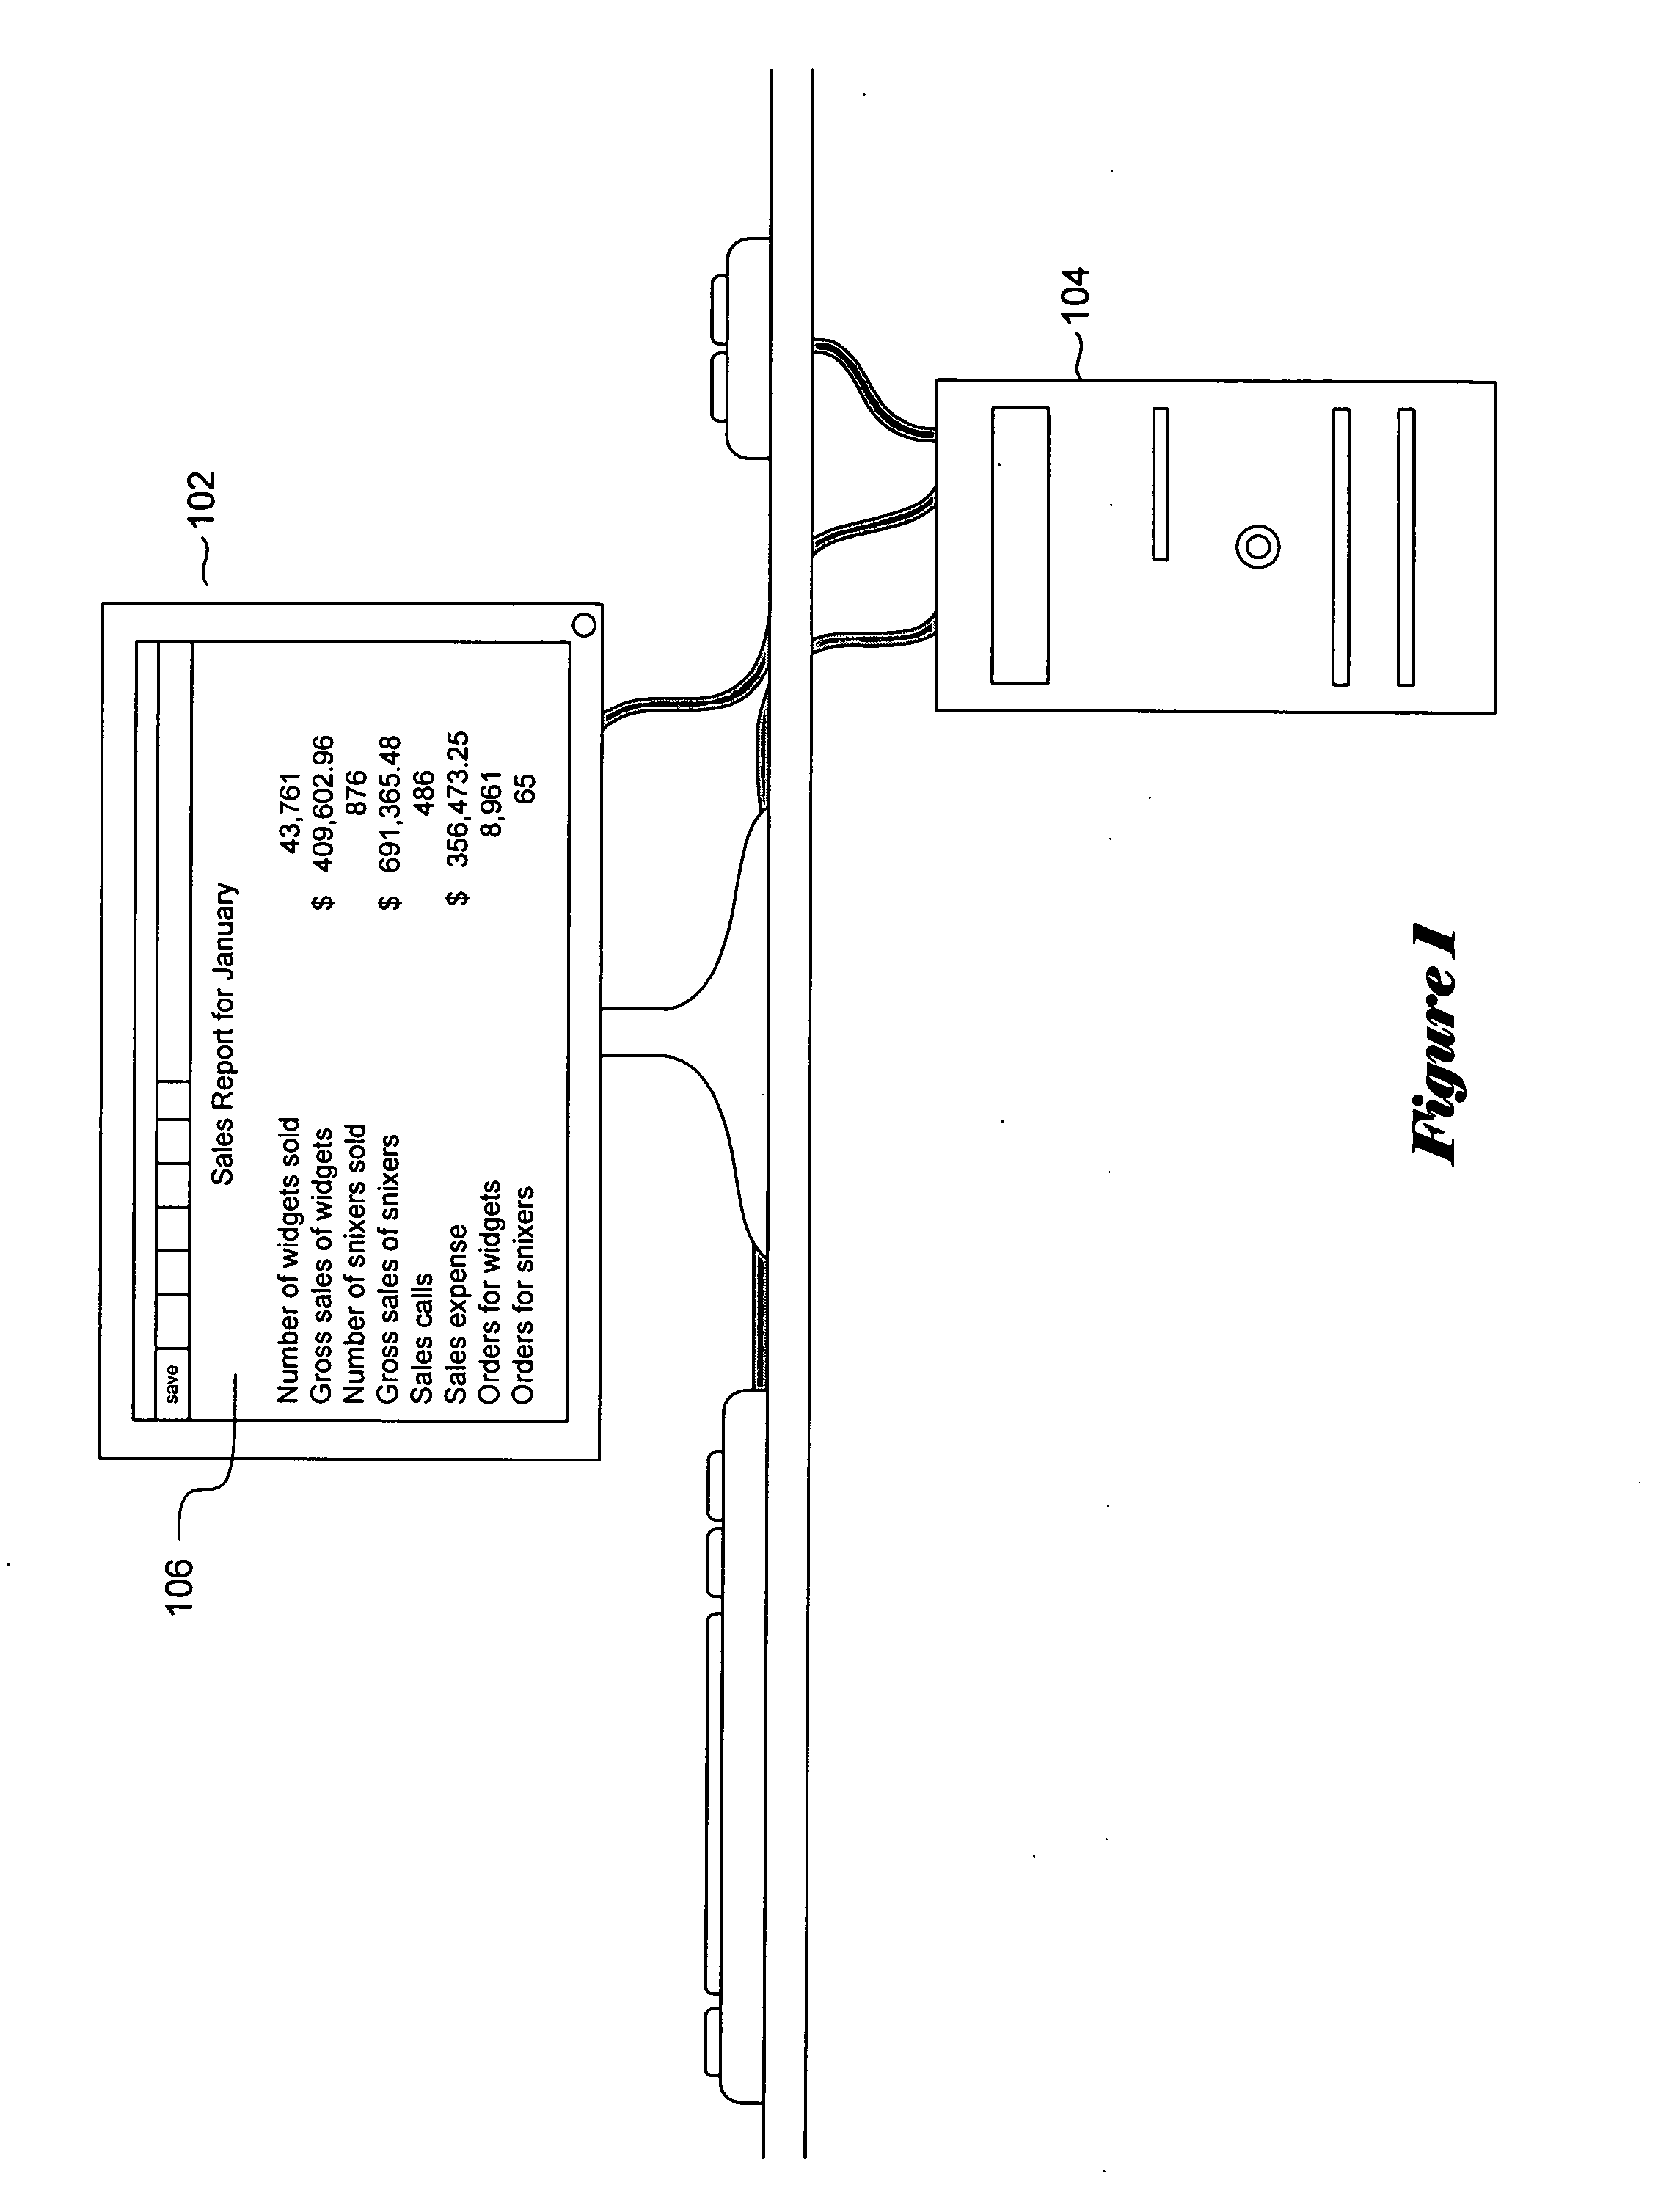 Distributed differential store with non-distributed objects and compression-enhancing data-object routing